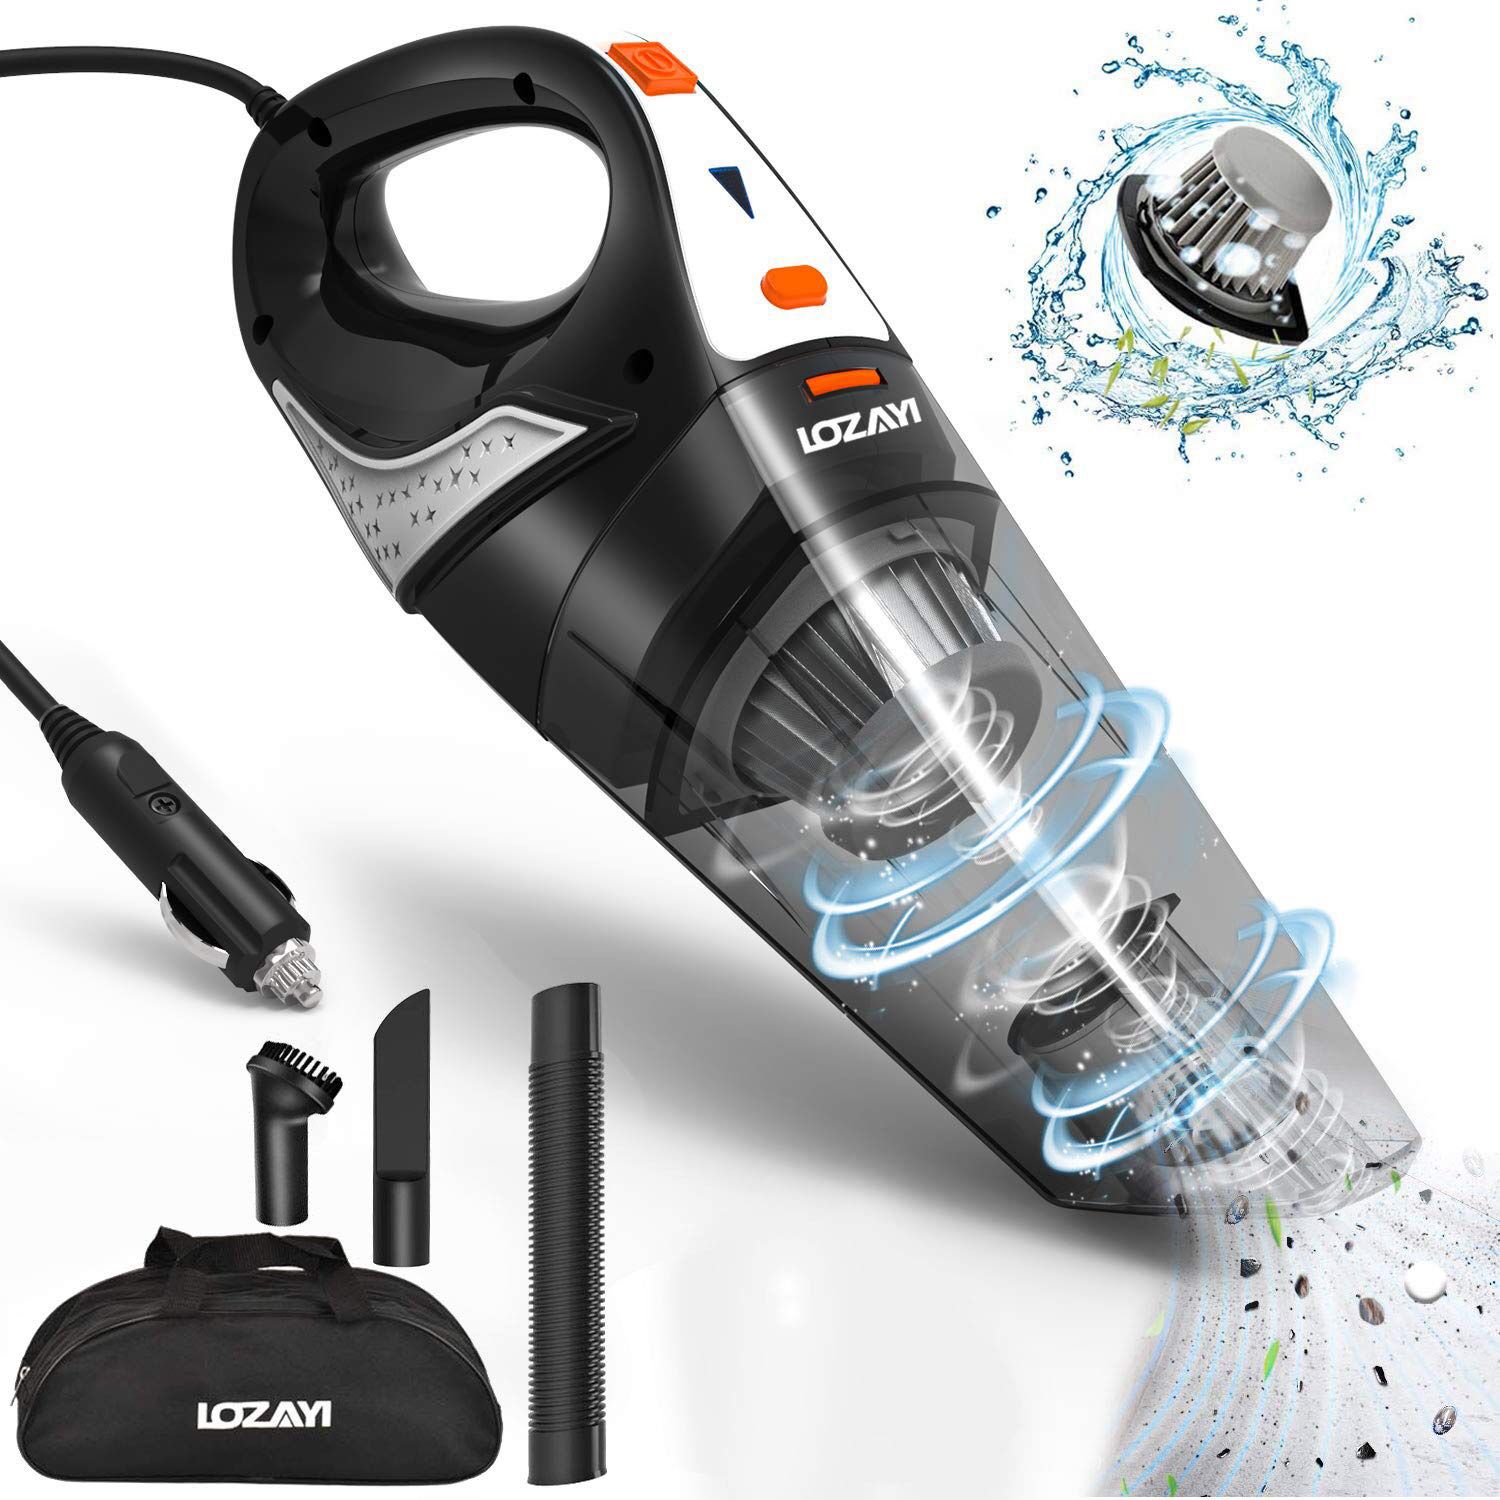 Car Vacuum,LOZAYI High Power DC 12V 5000PA Stronger Suction Car Vacuum Cleaner Wet/Dry Portable Handheld Auto Vacuum Cleaner with 16.4FT Power Cord,